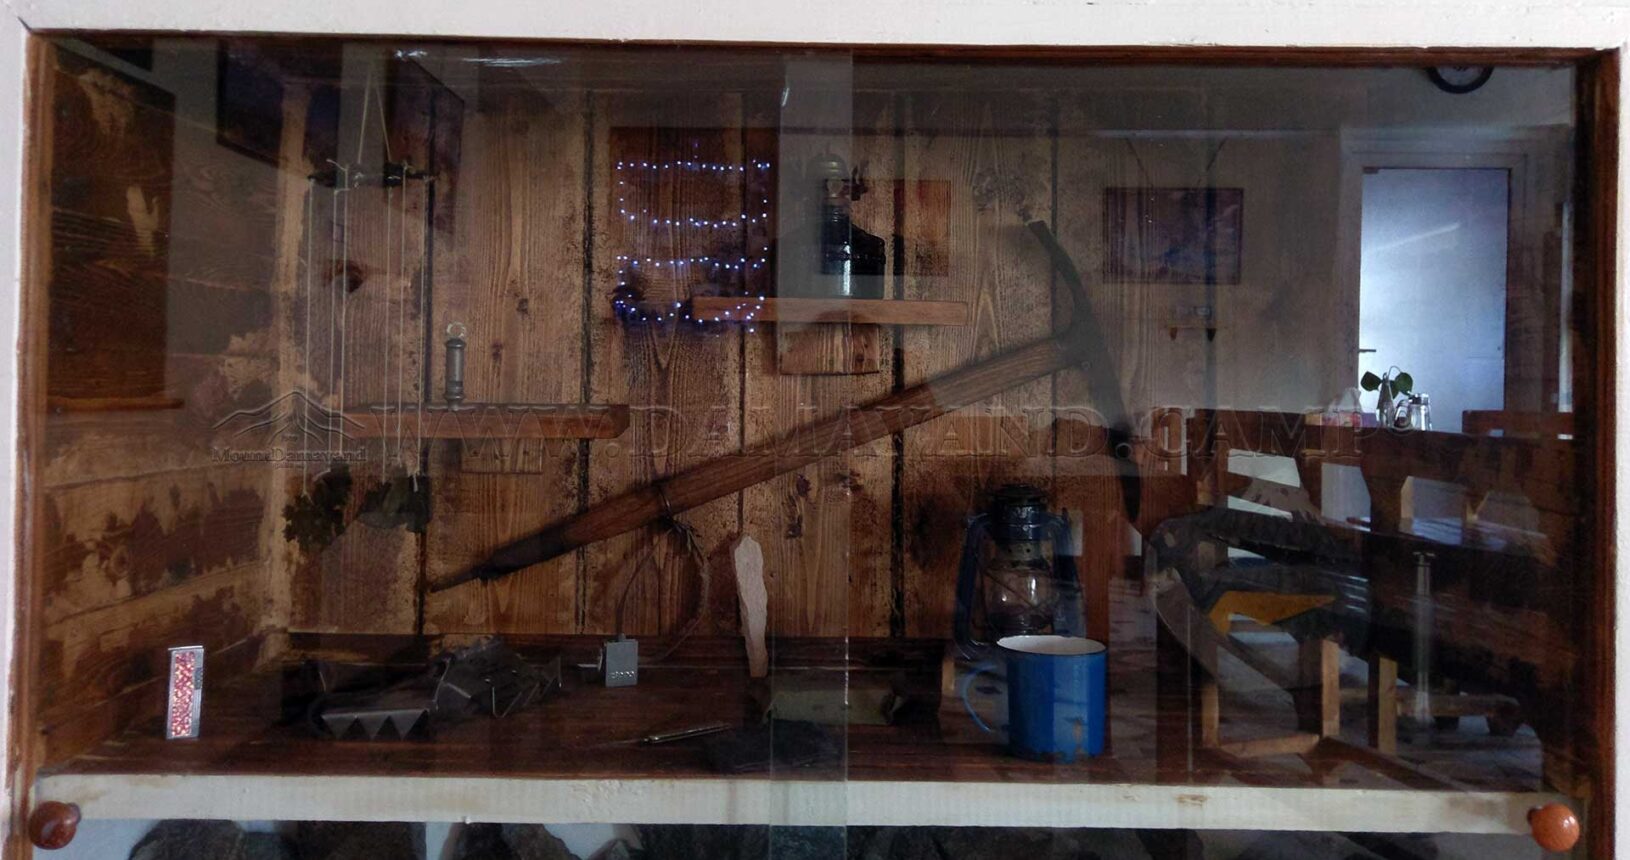 Old mountain gears in vitrine at Camp 1, Ice axe and other equipment.